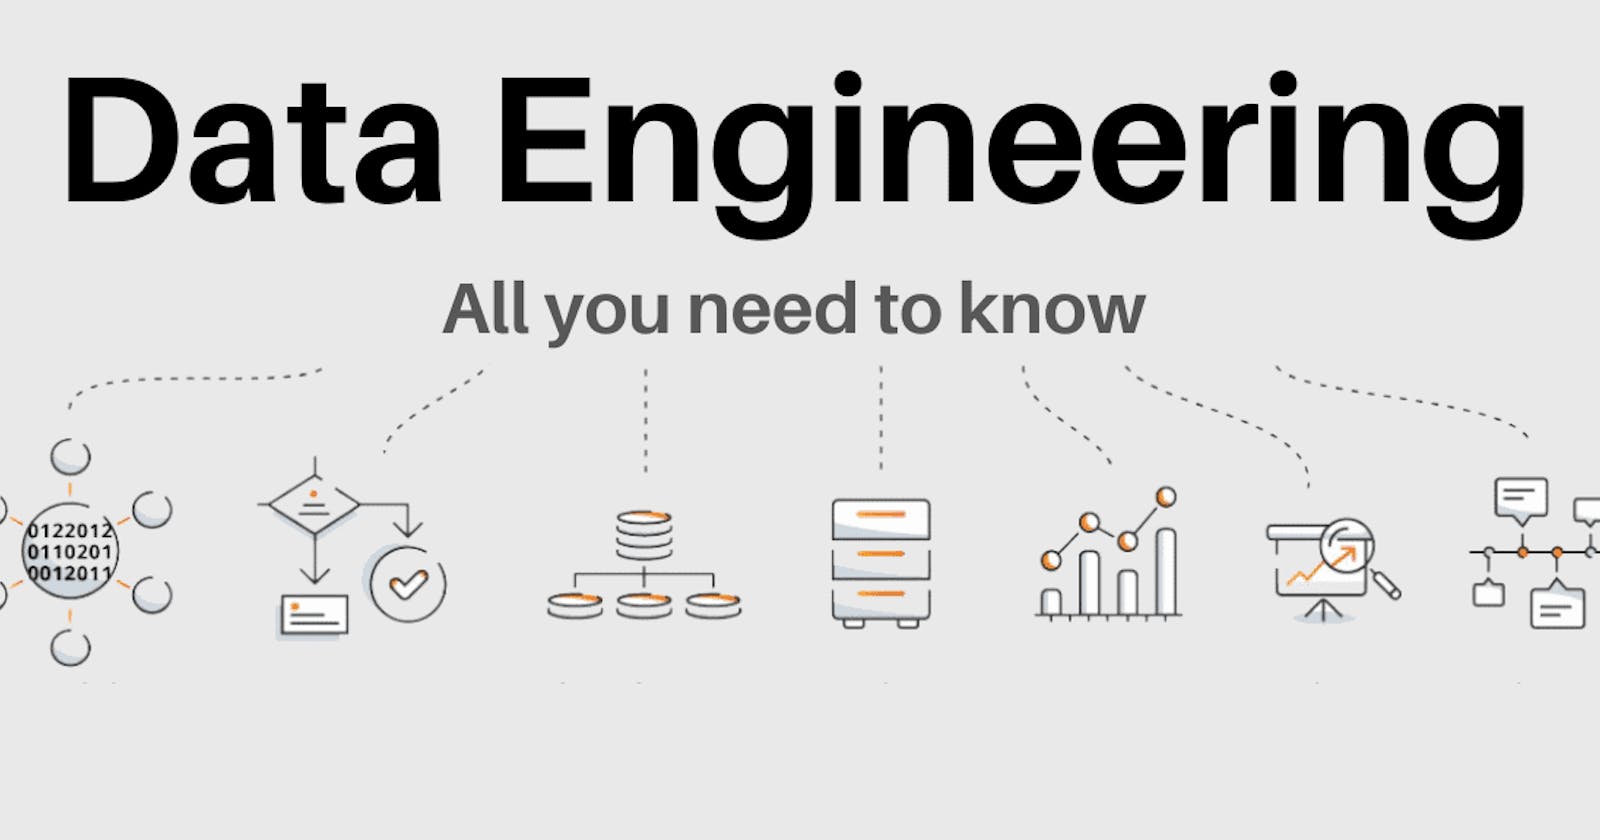 Mastering the basics: What is Data Engineering